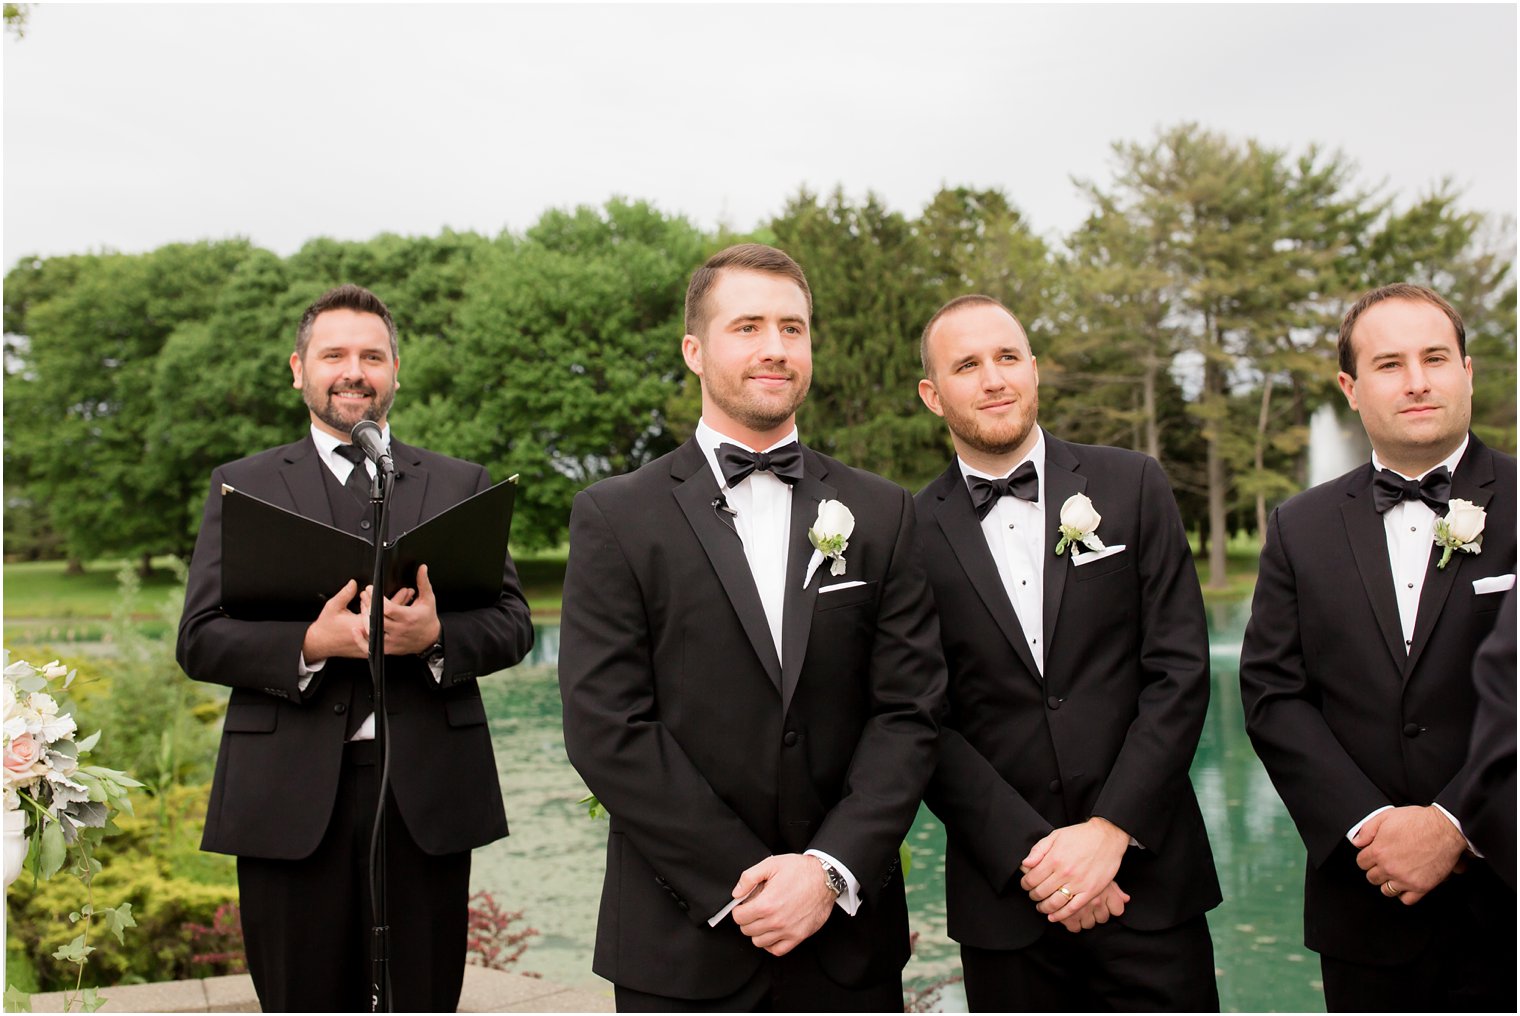 Groom during processional at Windows on the Water at Frogbridge Wedding | Photos by Idalia Photography